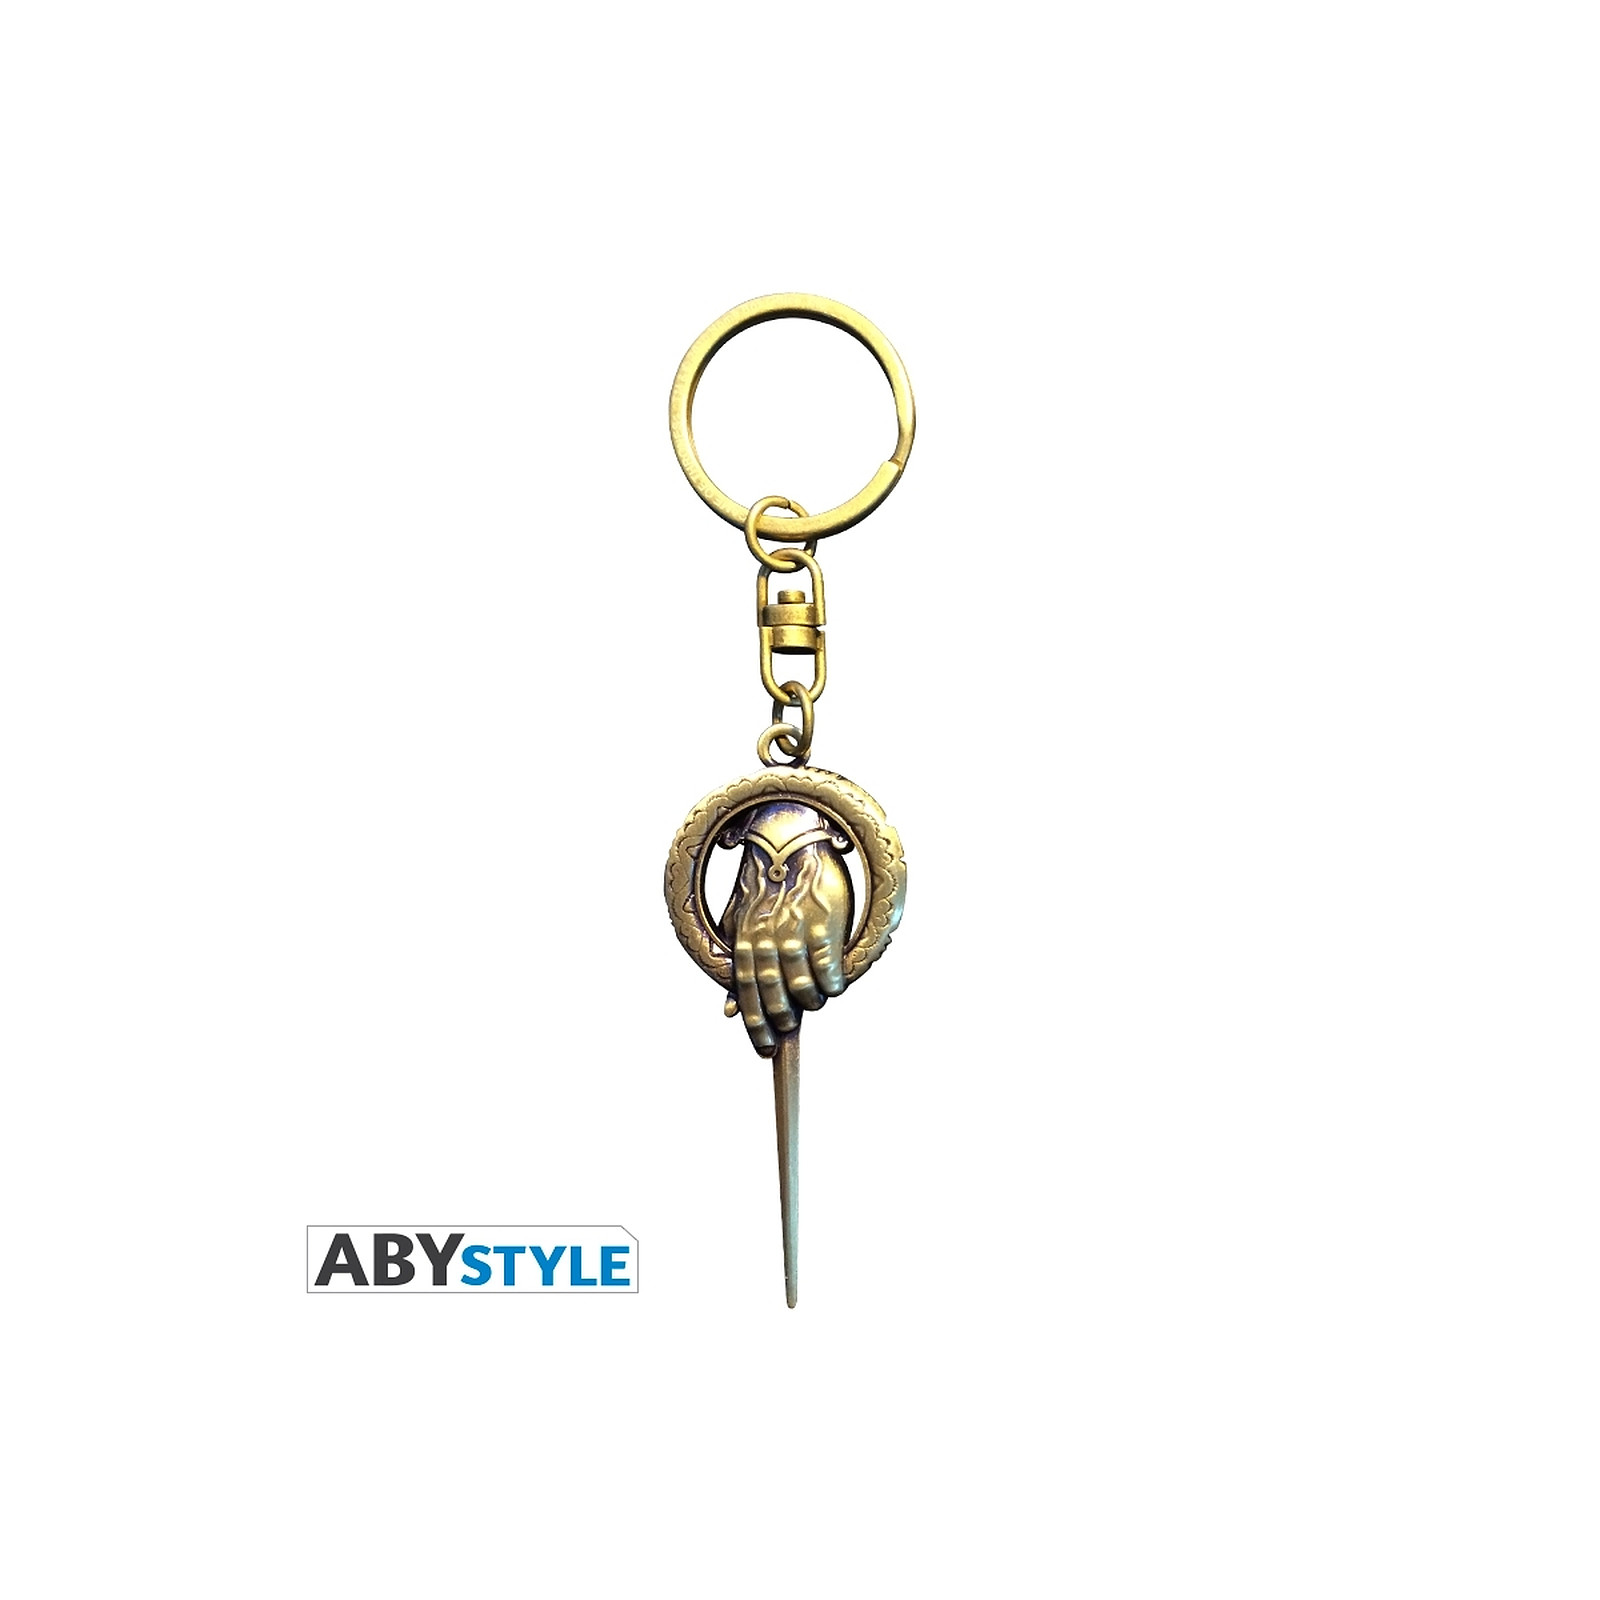 Game Of Thrones - Porte-cles 3D Main du roi - Porte-cles Abystyle